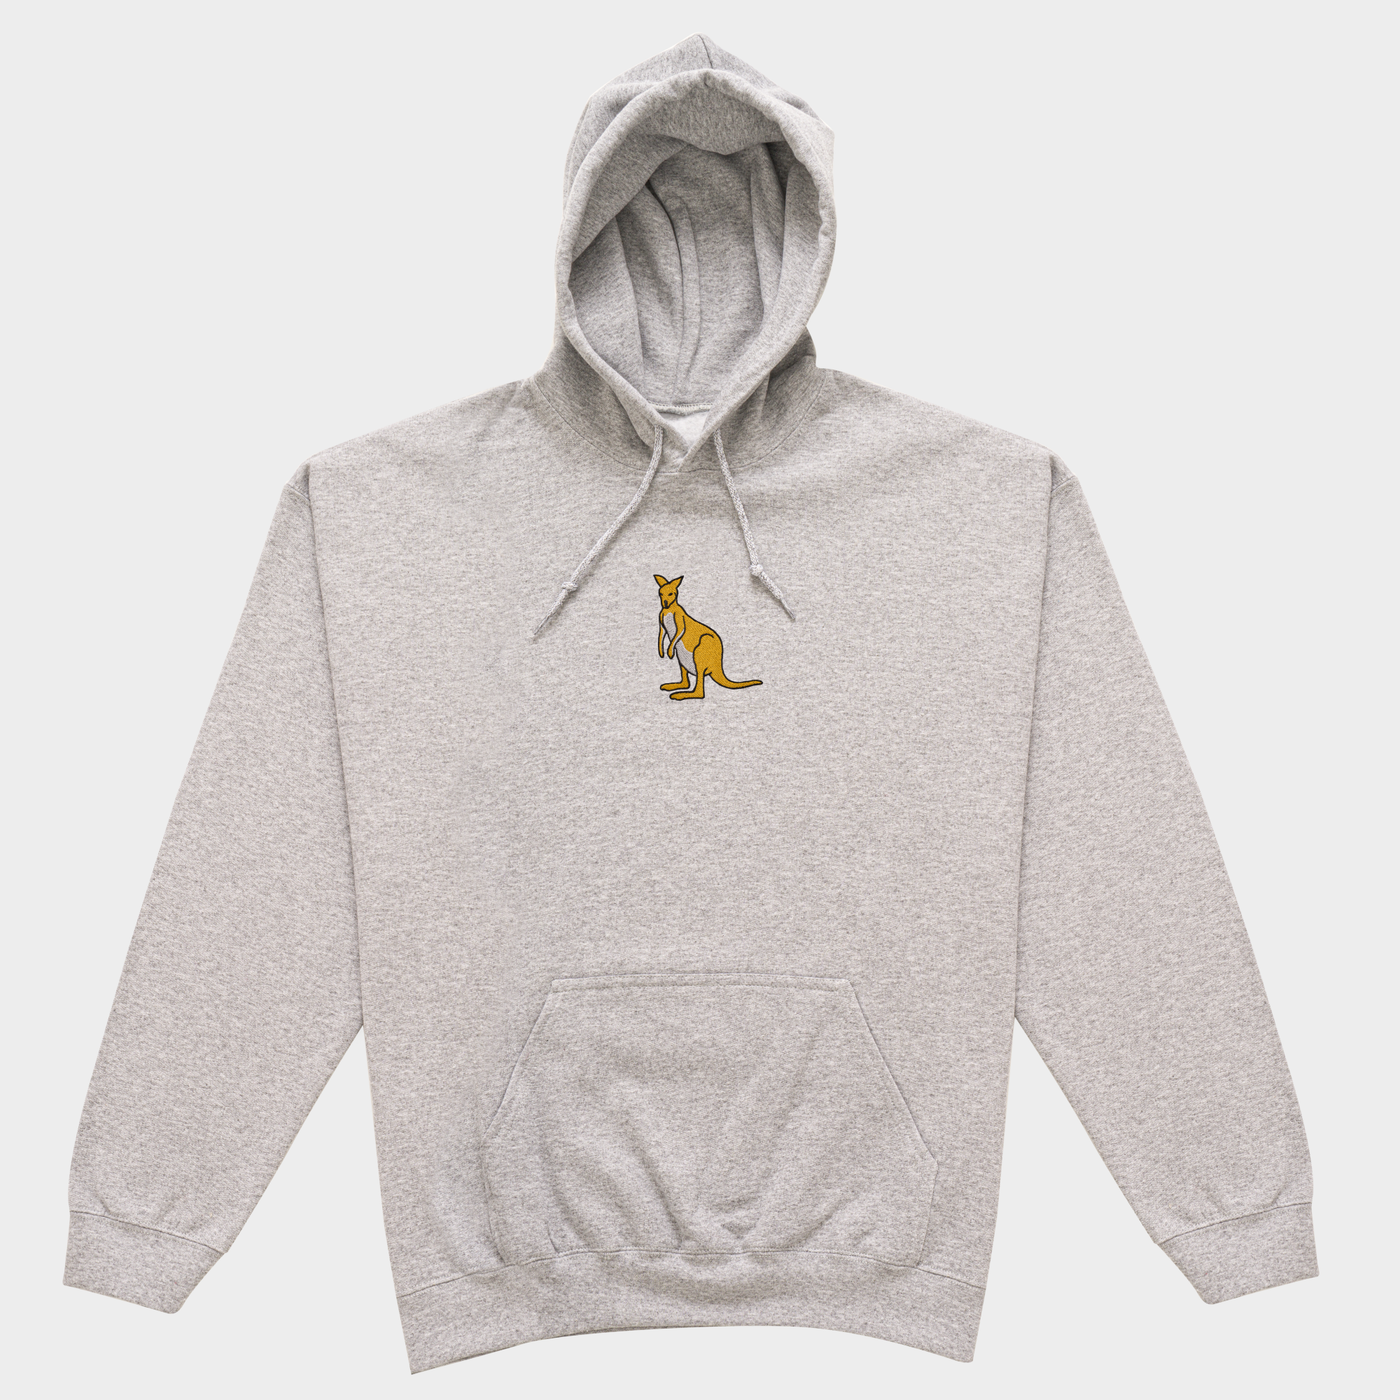 Bobby's Planet Men's Embroidered Kangaroo Hoodie from Australia Down Under Animals Collection in Sport Grey Color#color_sport-grey